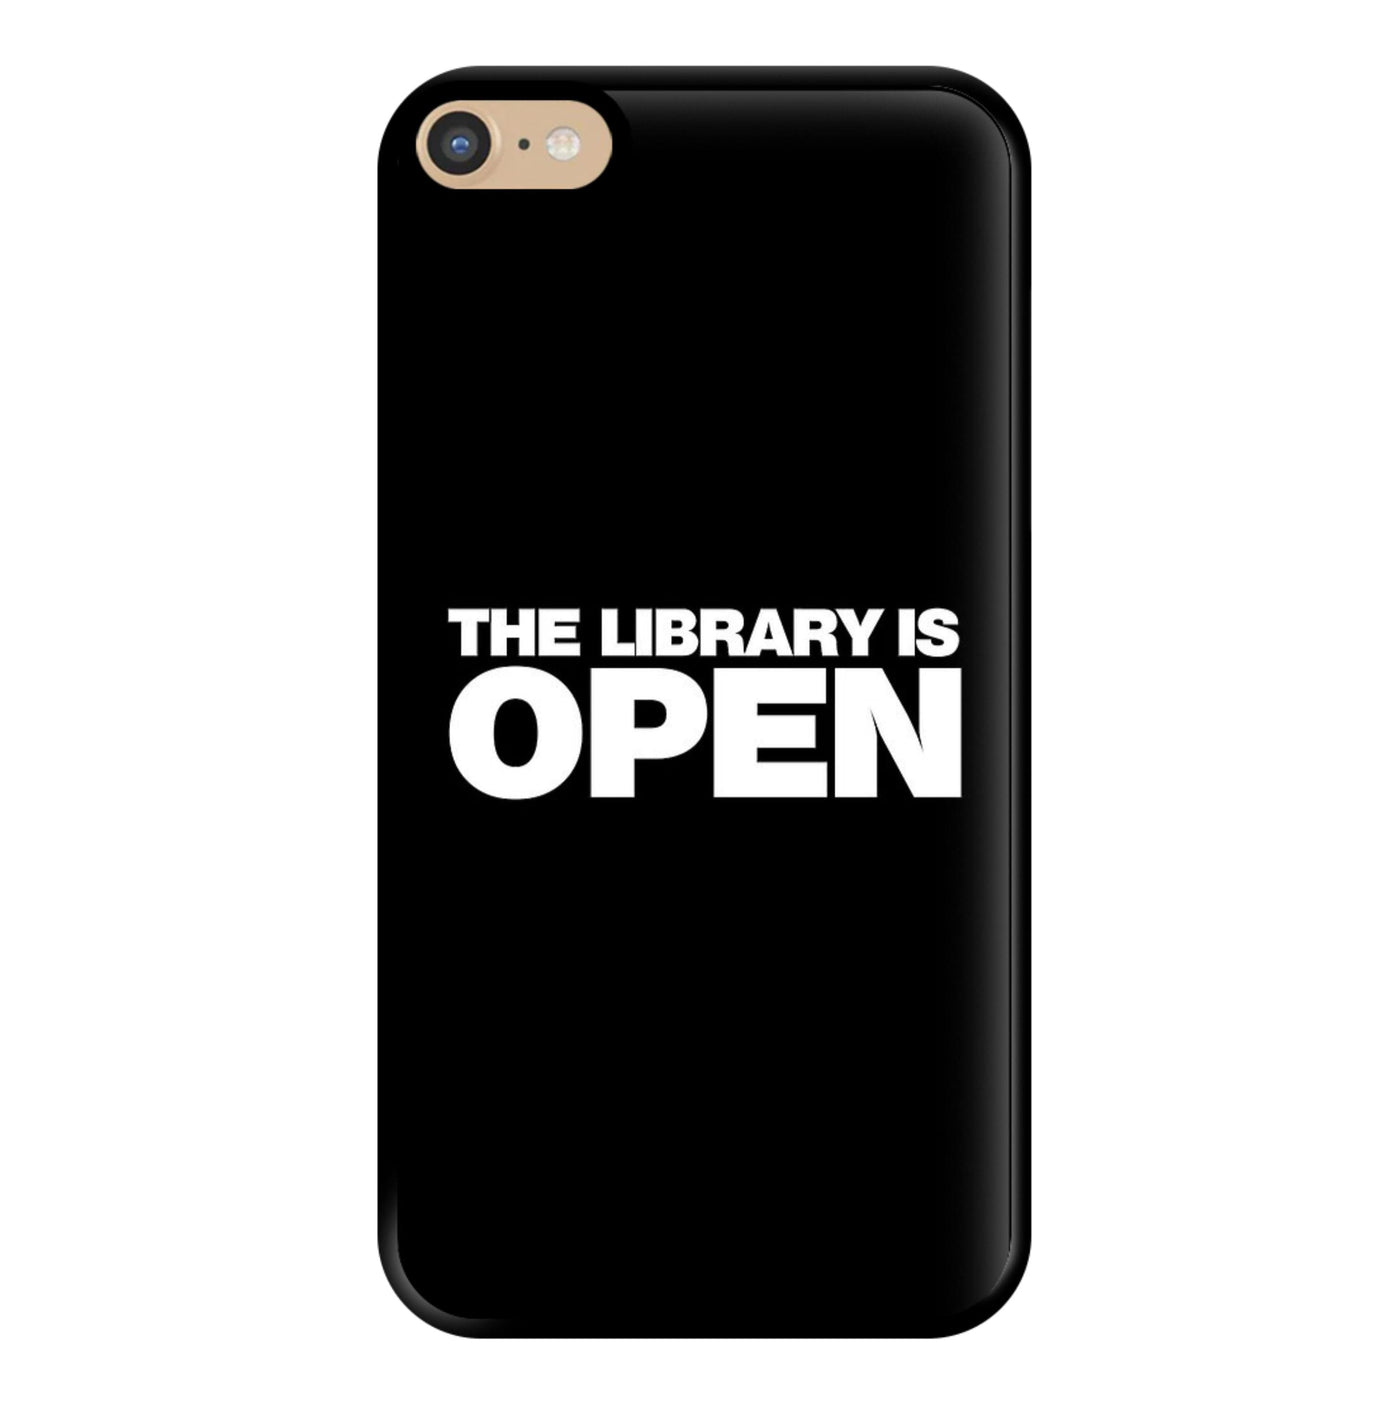 The Library is OPEN - RuPaul's Drag Race Phone Case